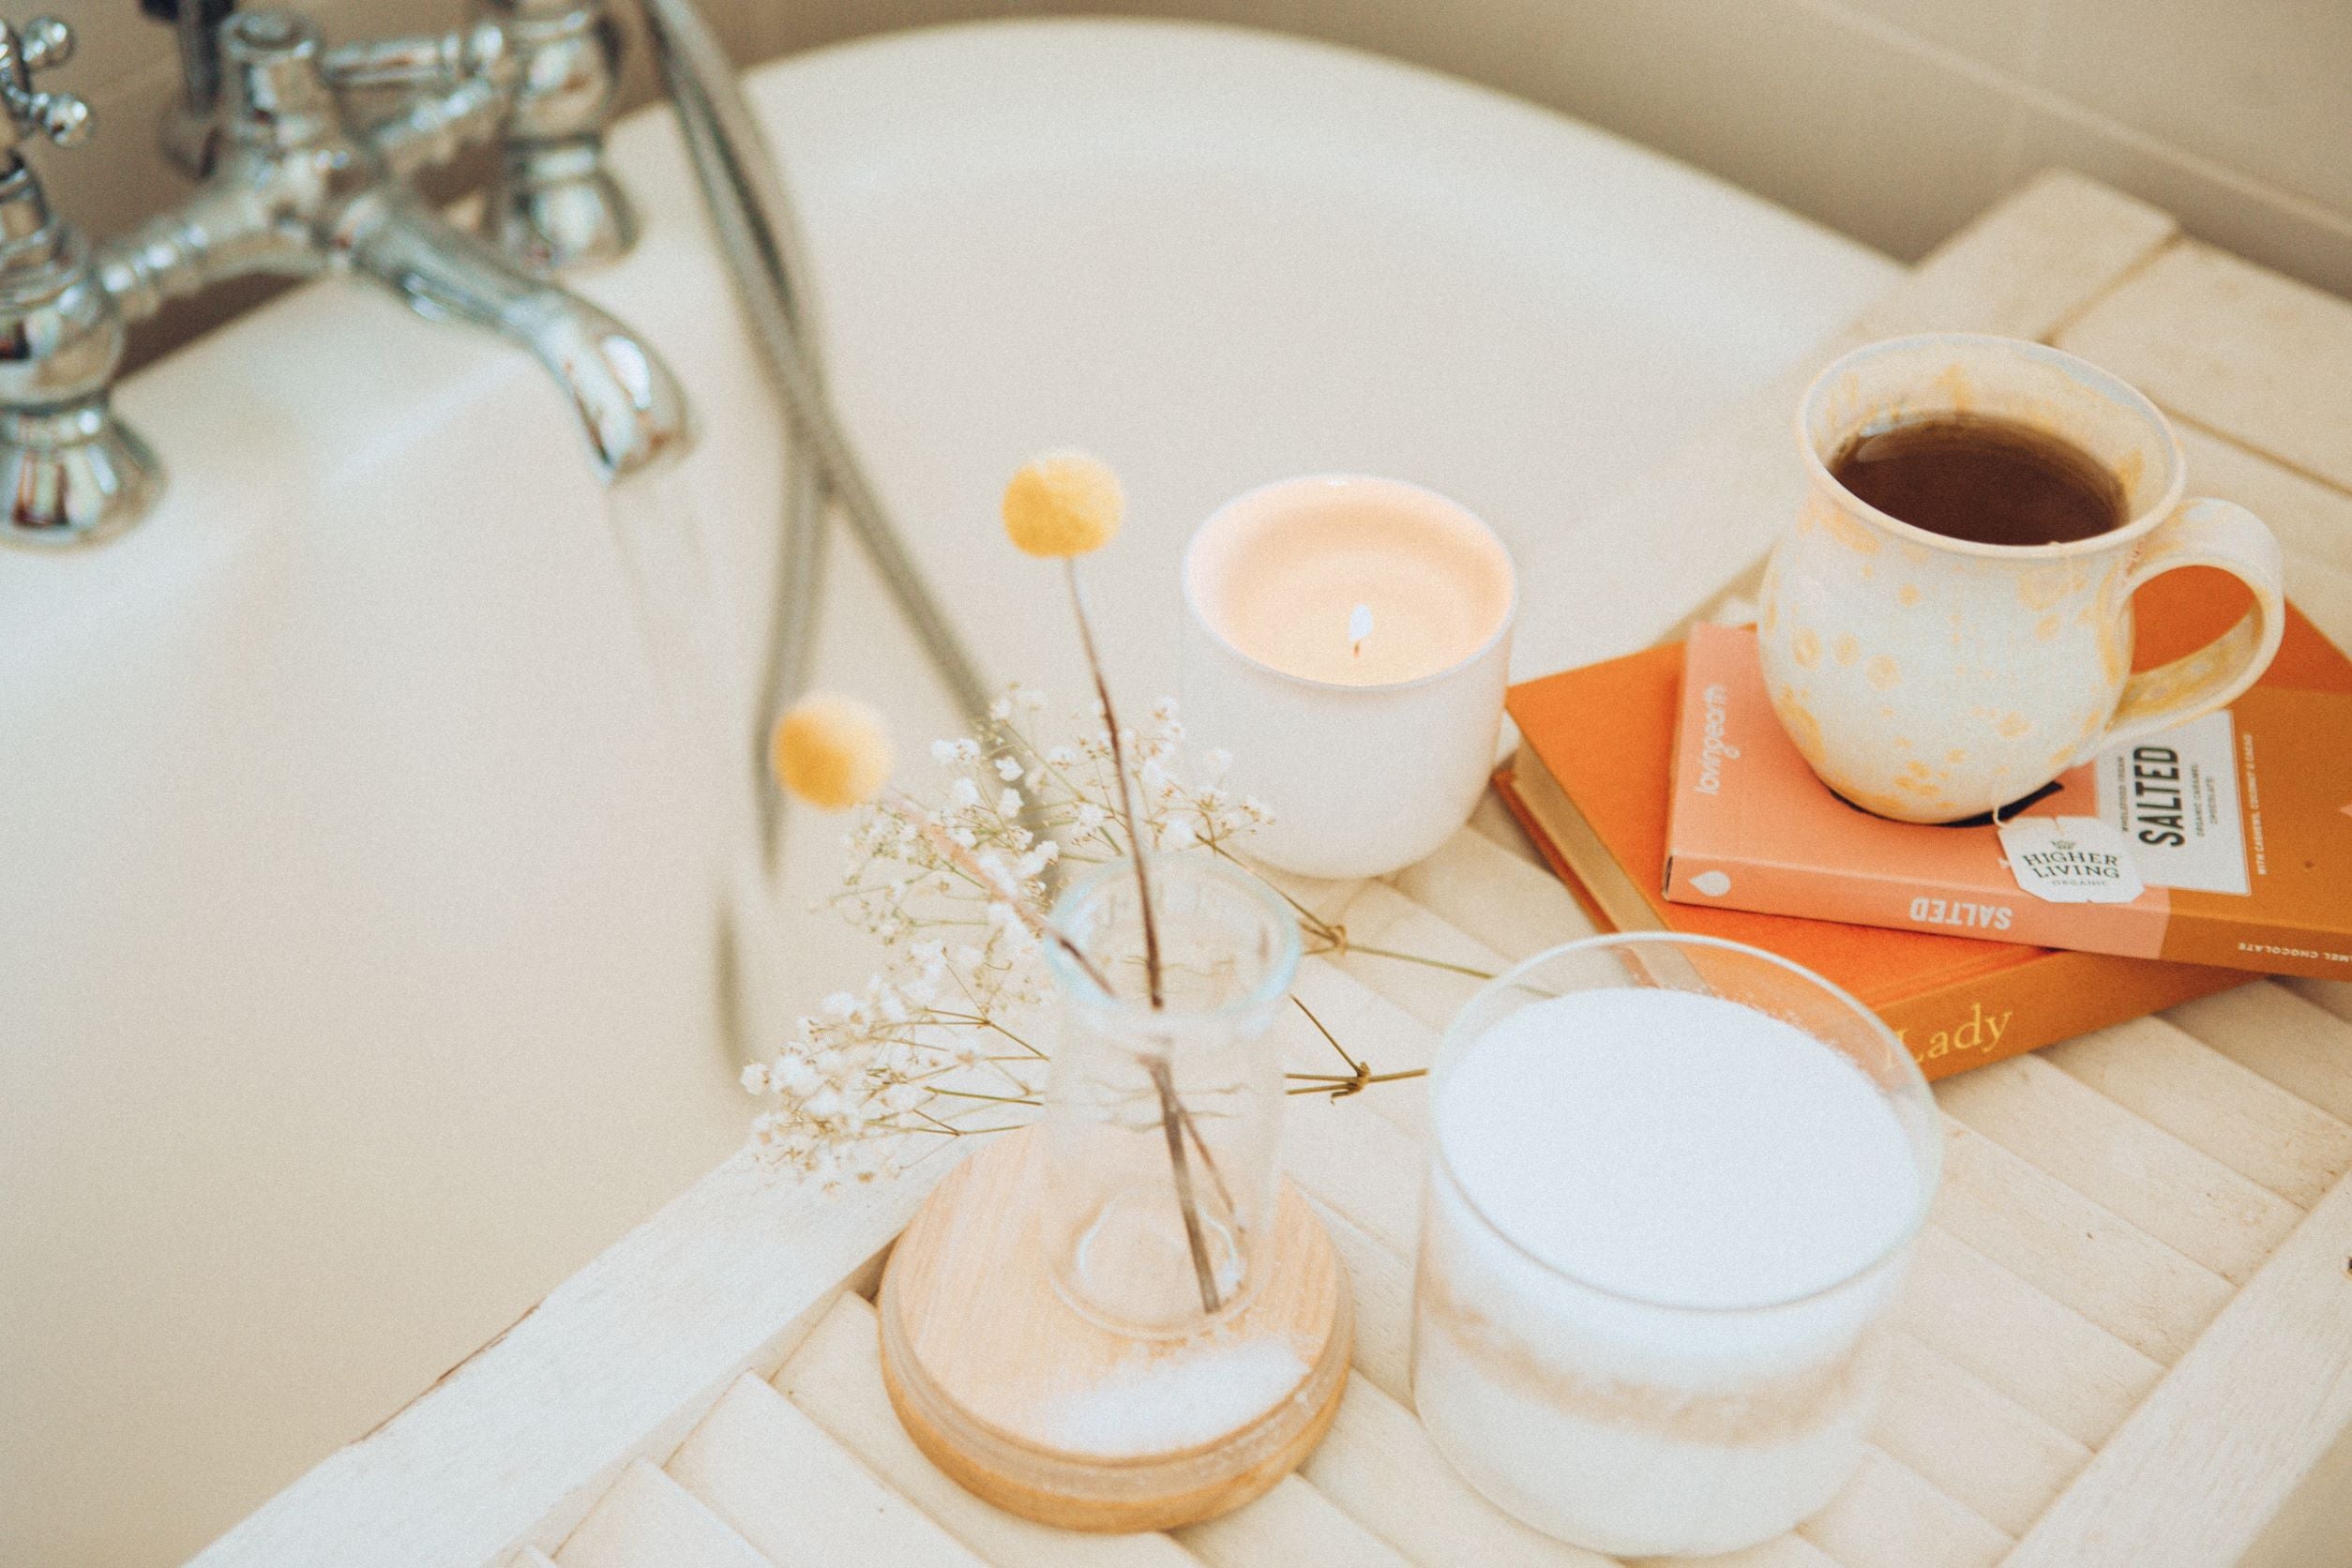 Image of a bath tray over a bath tub with items on it - cup of tea, books, candle, flowers.